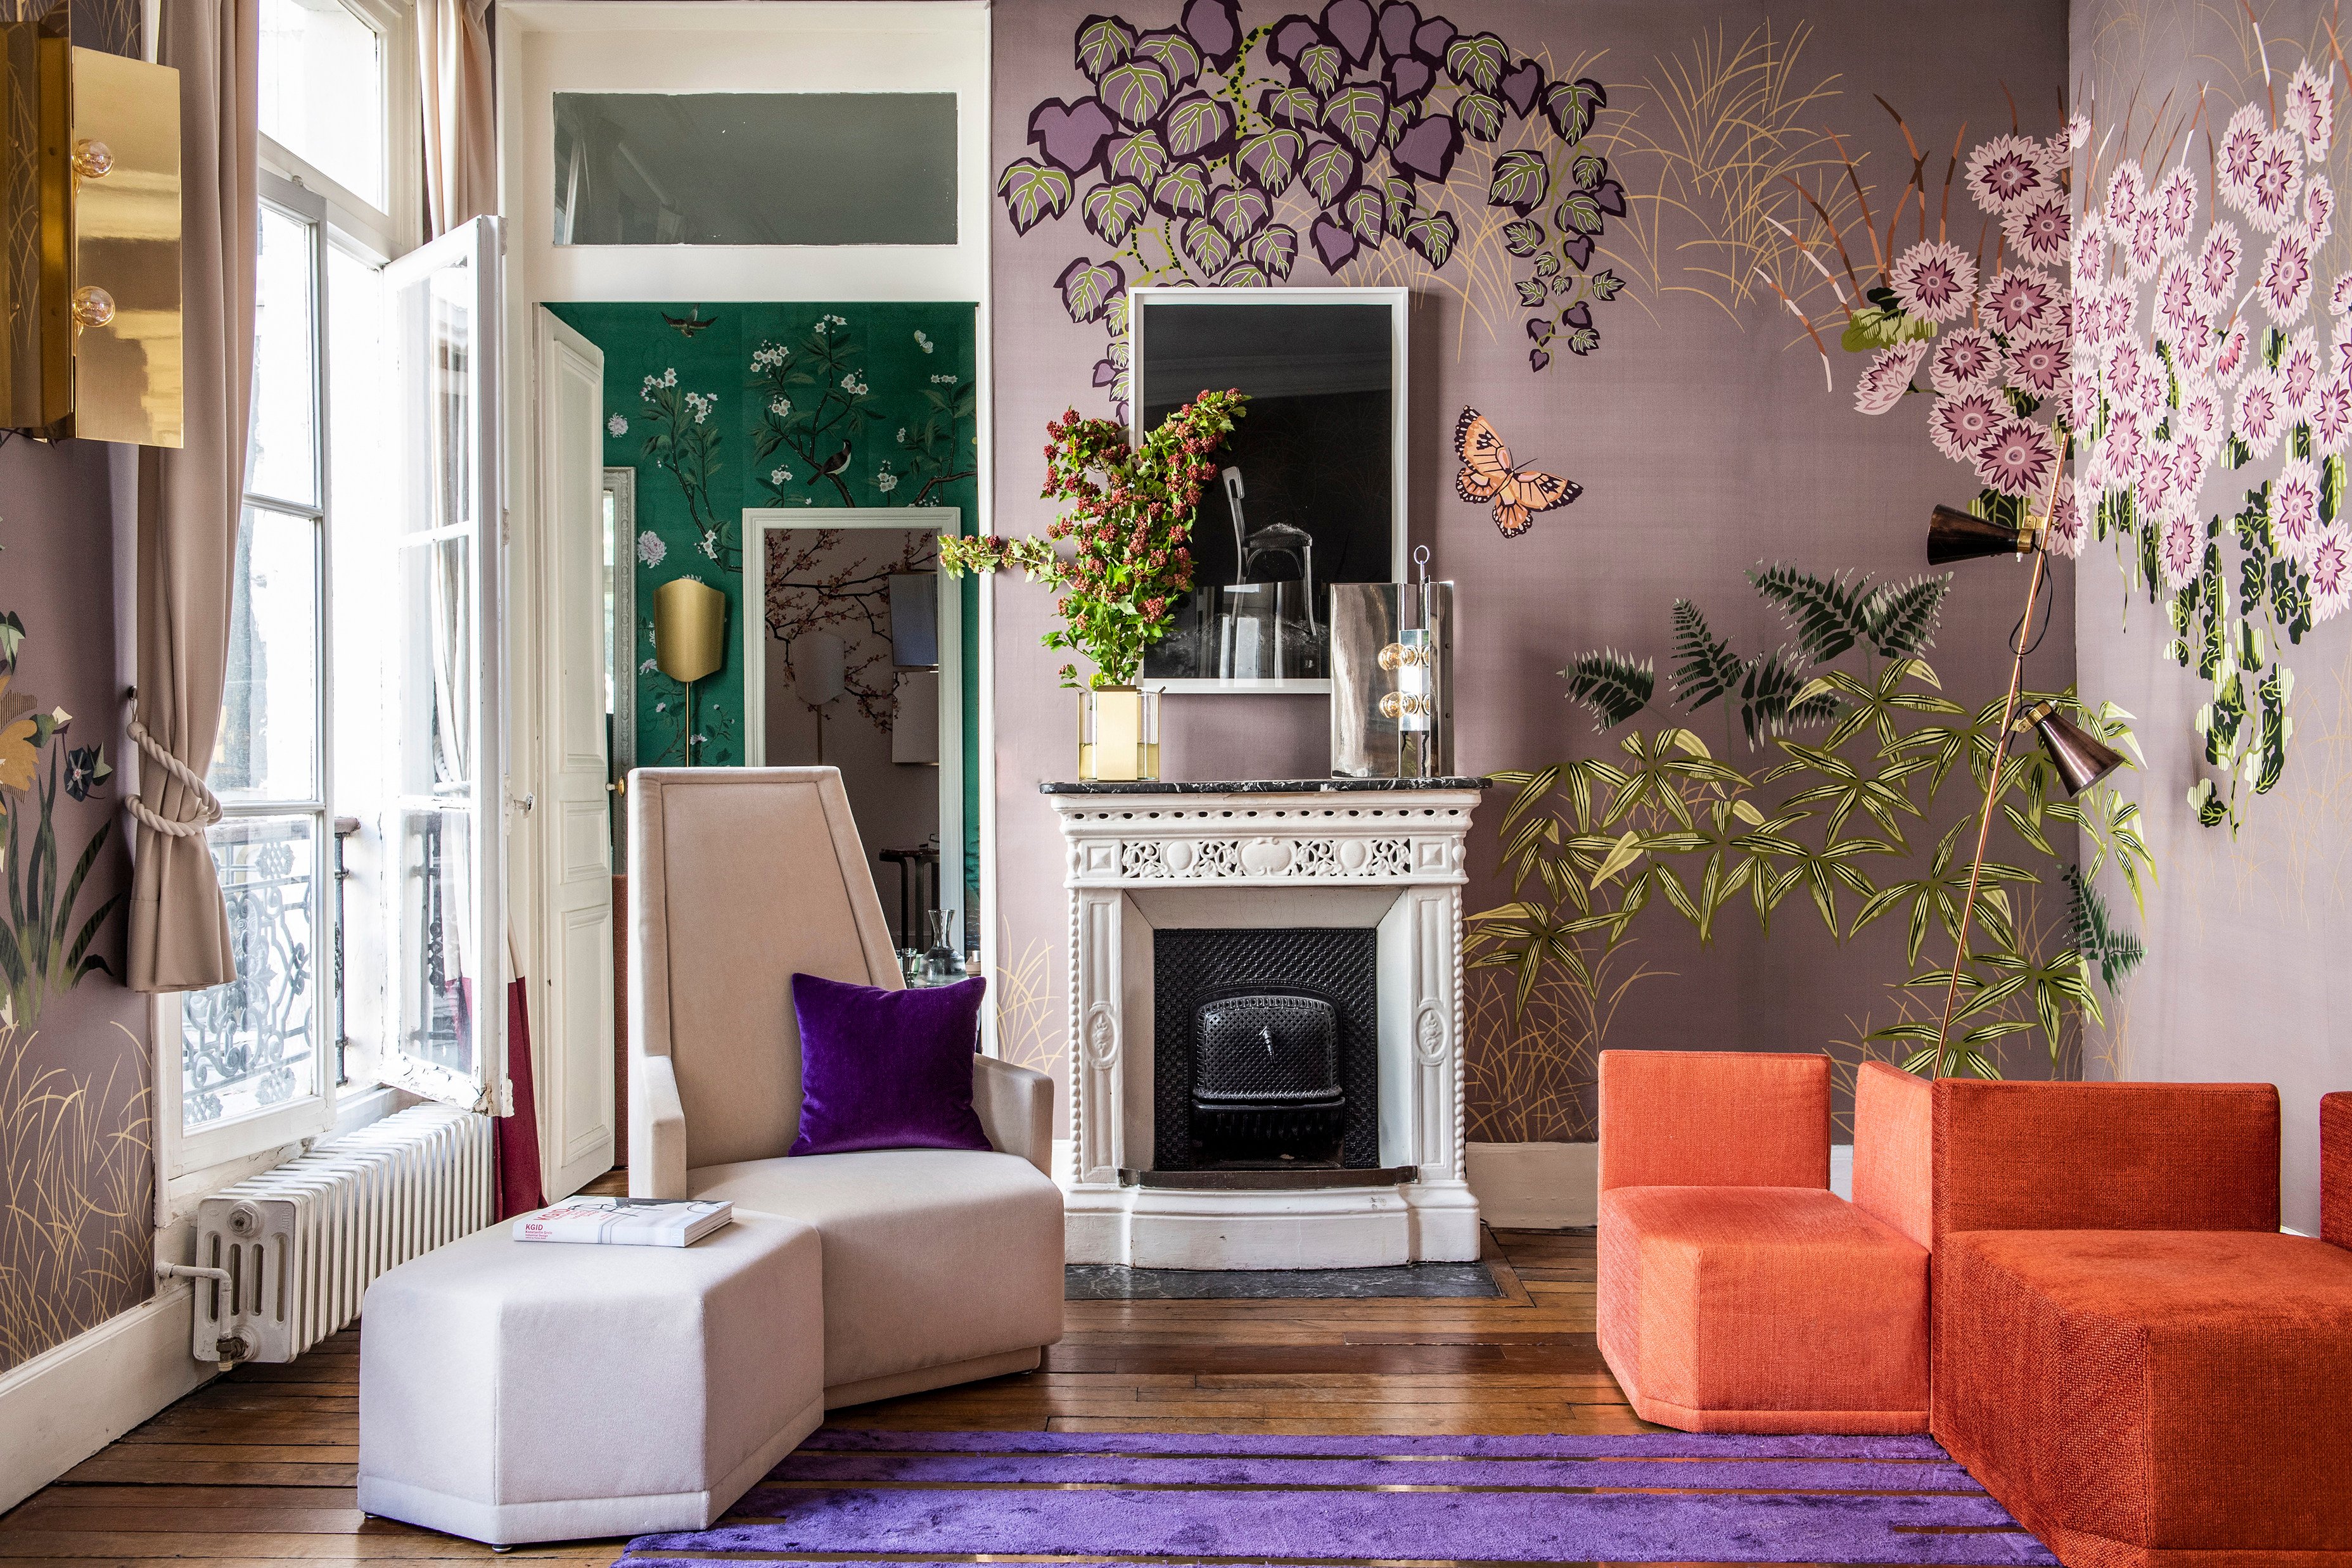 Fromental are just one brand now offering hand-painted wallpapers. Photos: Handout